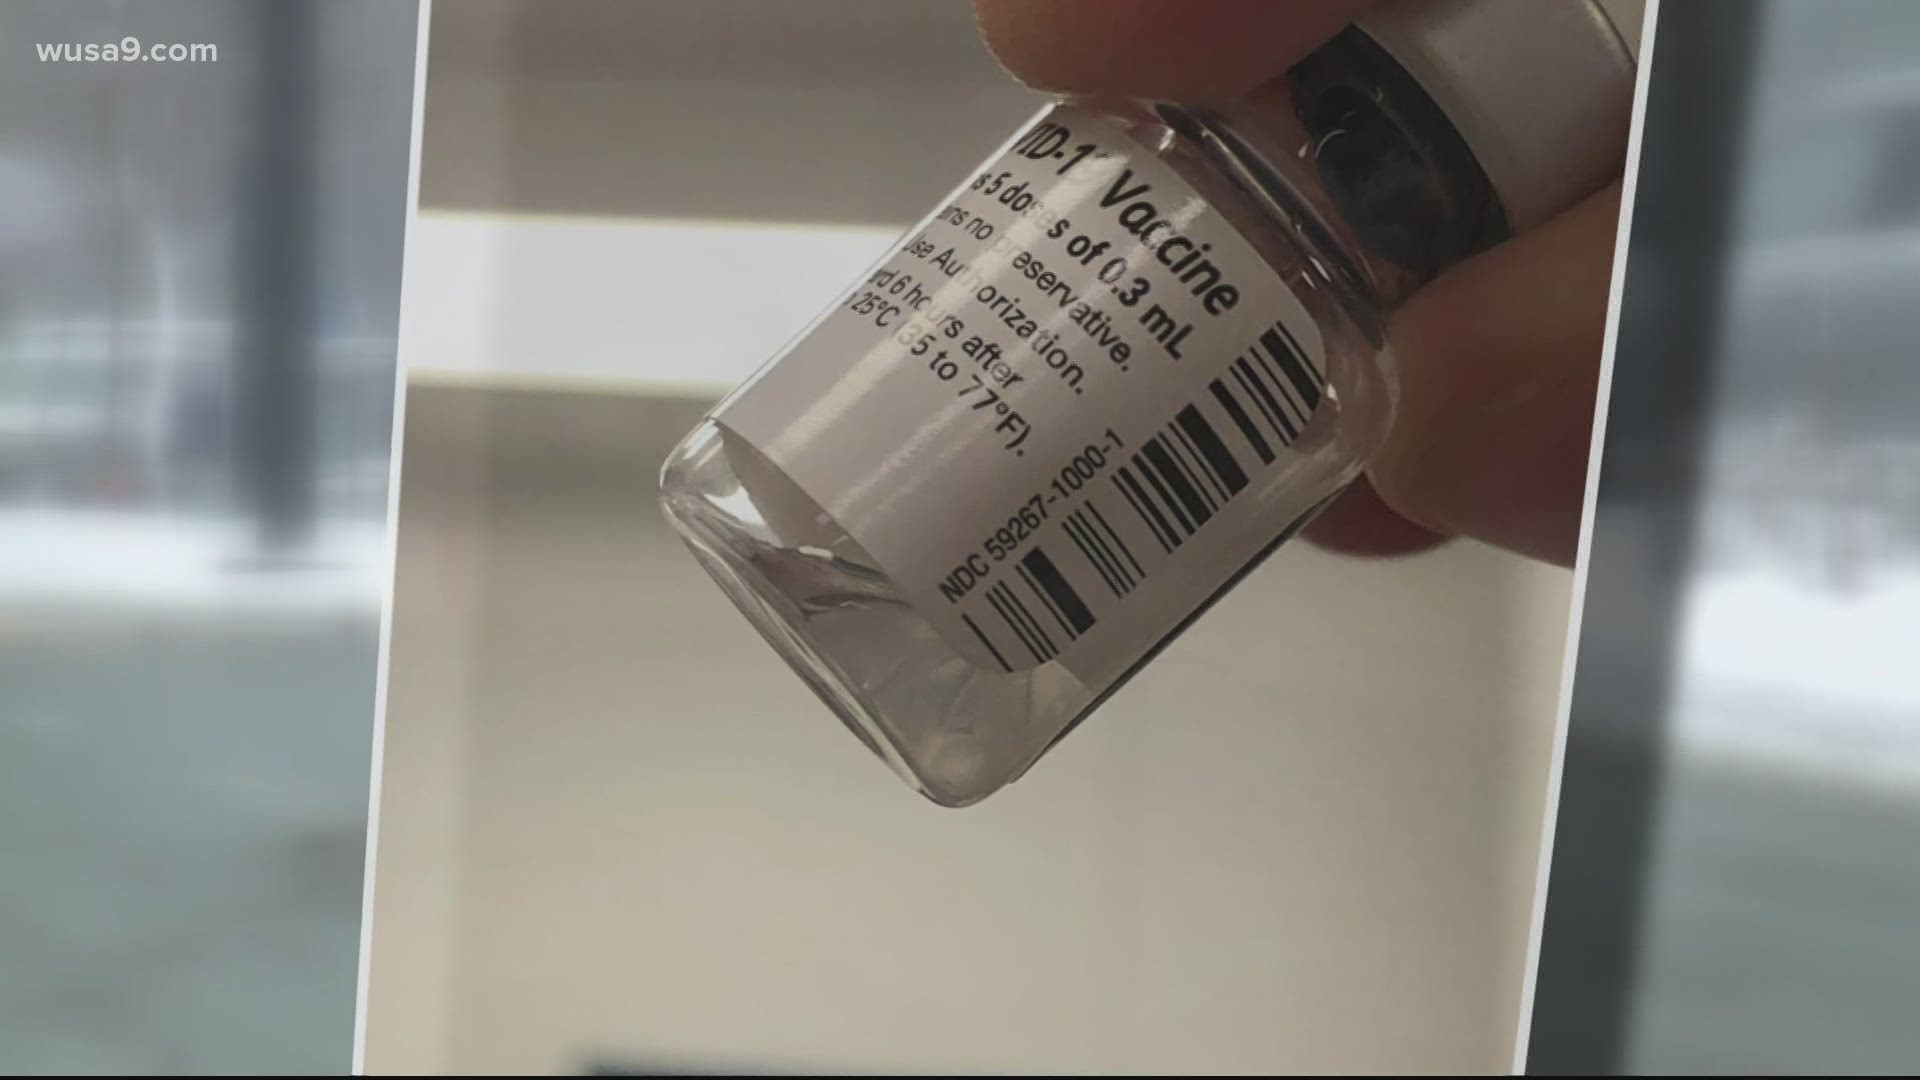 The chief pharmacist at Inova Fairfax says they could be vaccinating hundreds more a day, if the FDA would let them use leftovers at the bottom of scores of vials.